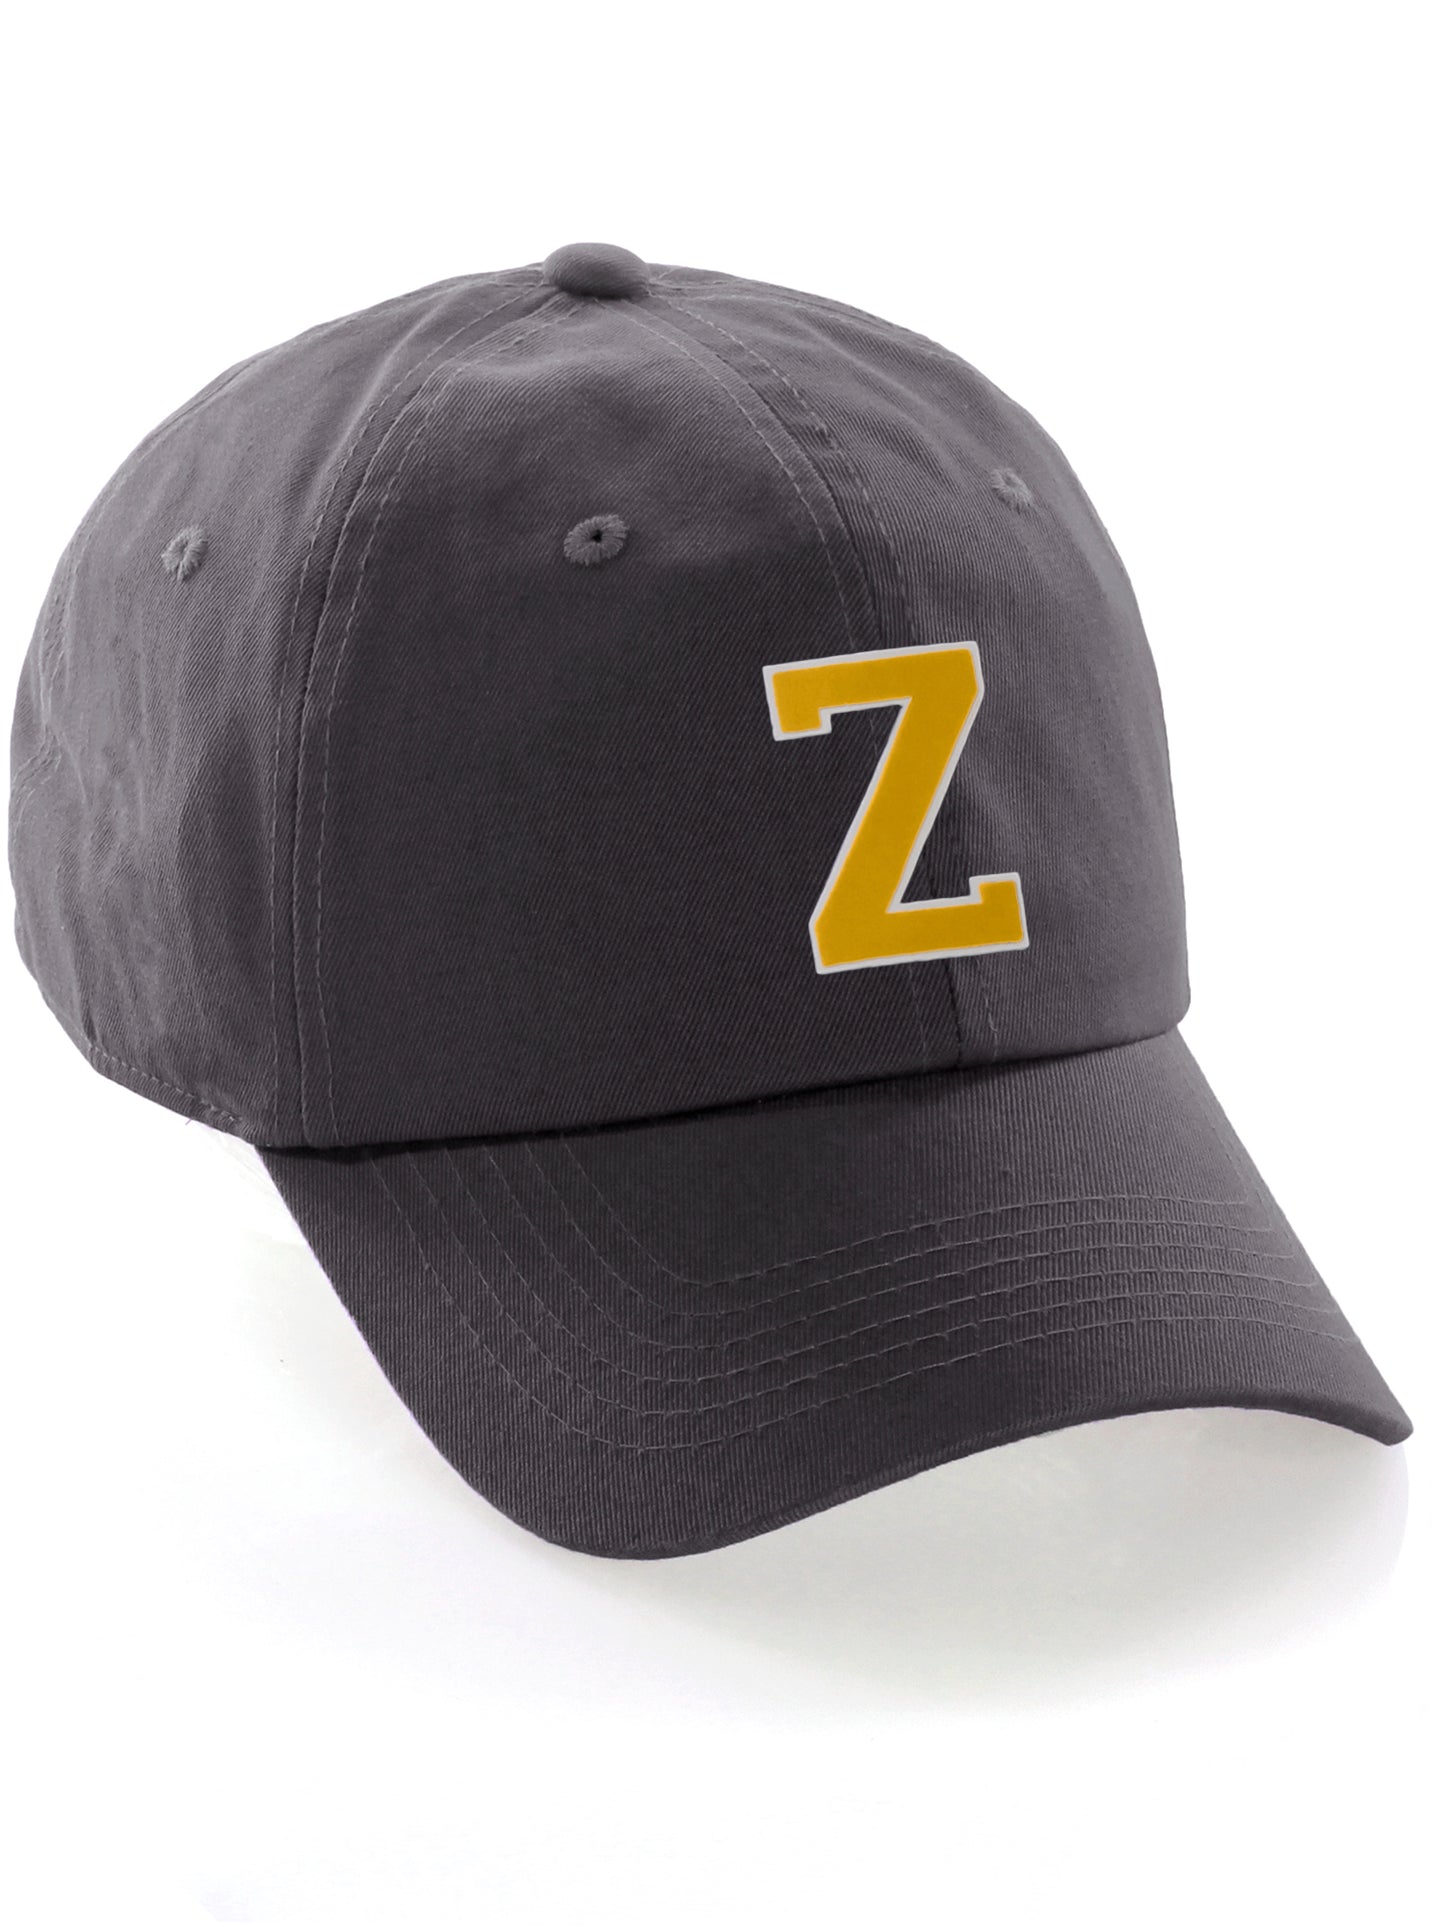 Custom hat A to Z Initial Letters Classic Baseball Cap, Charcoal Hat White Gold